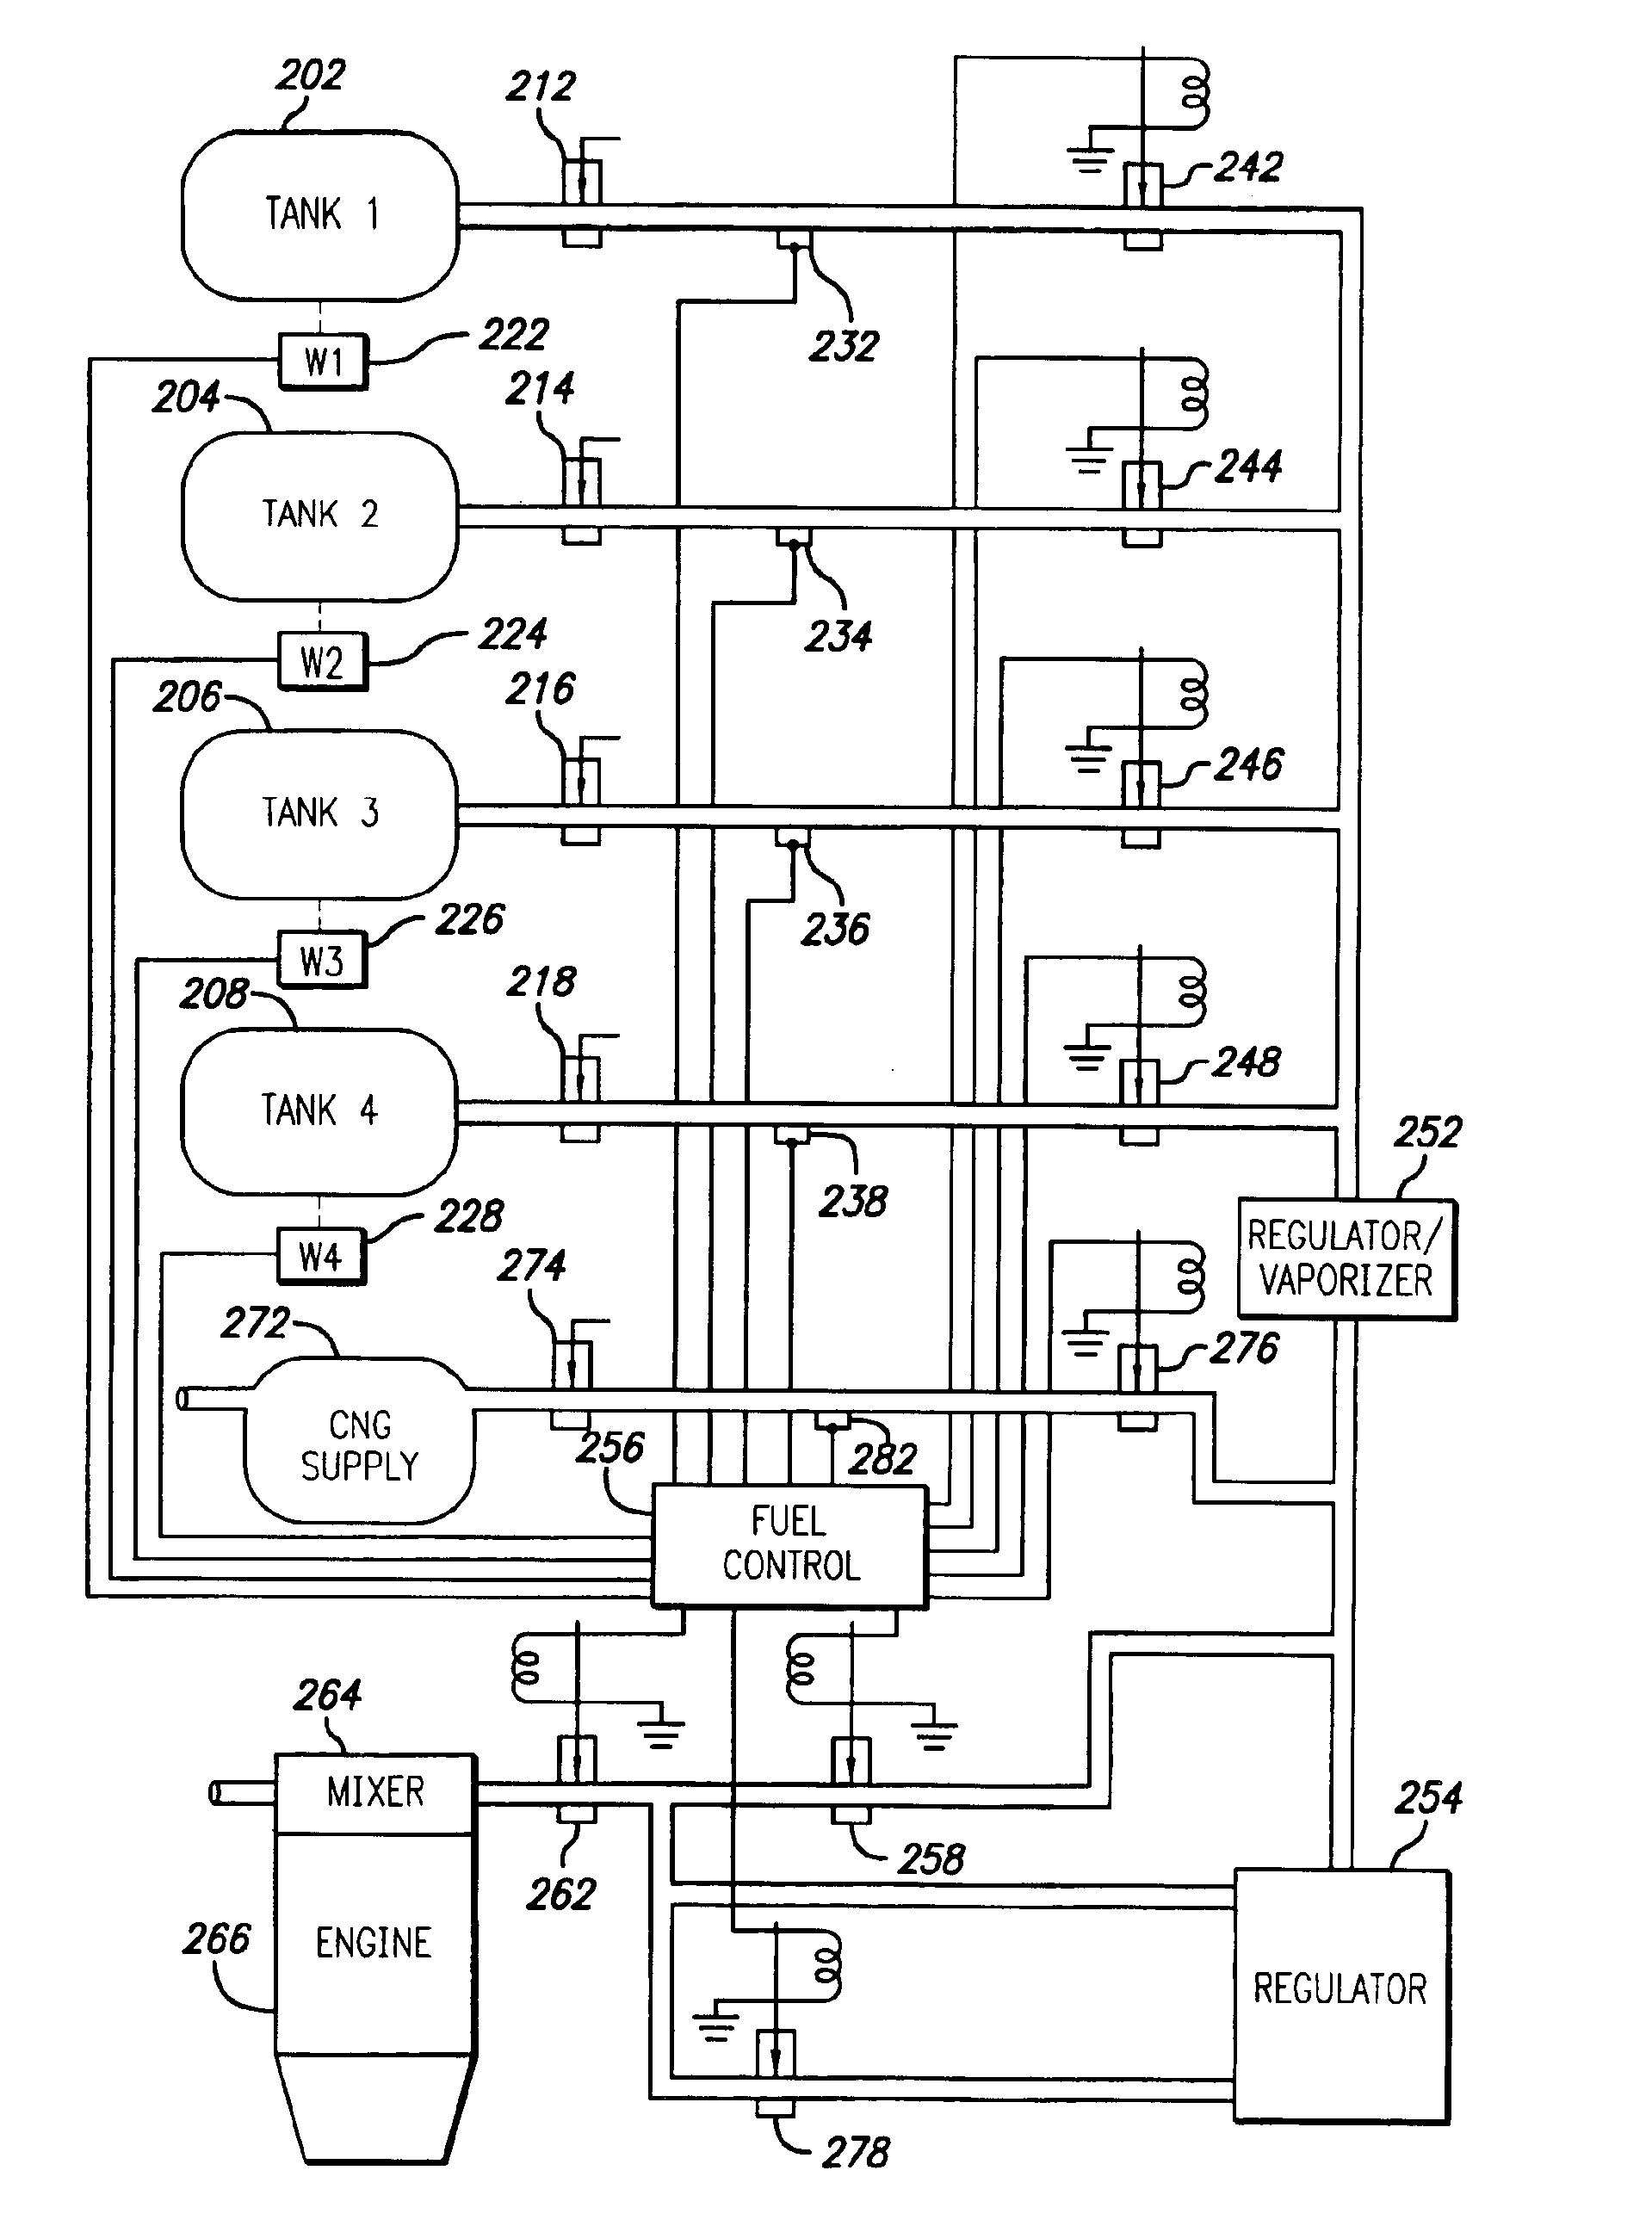 Fuel control system and method for distributed power generation, conversion, and storage system